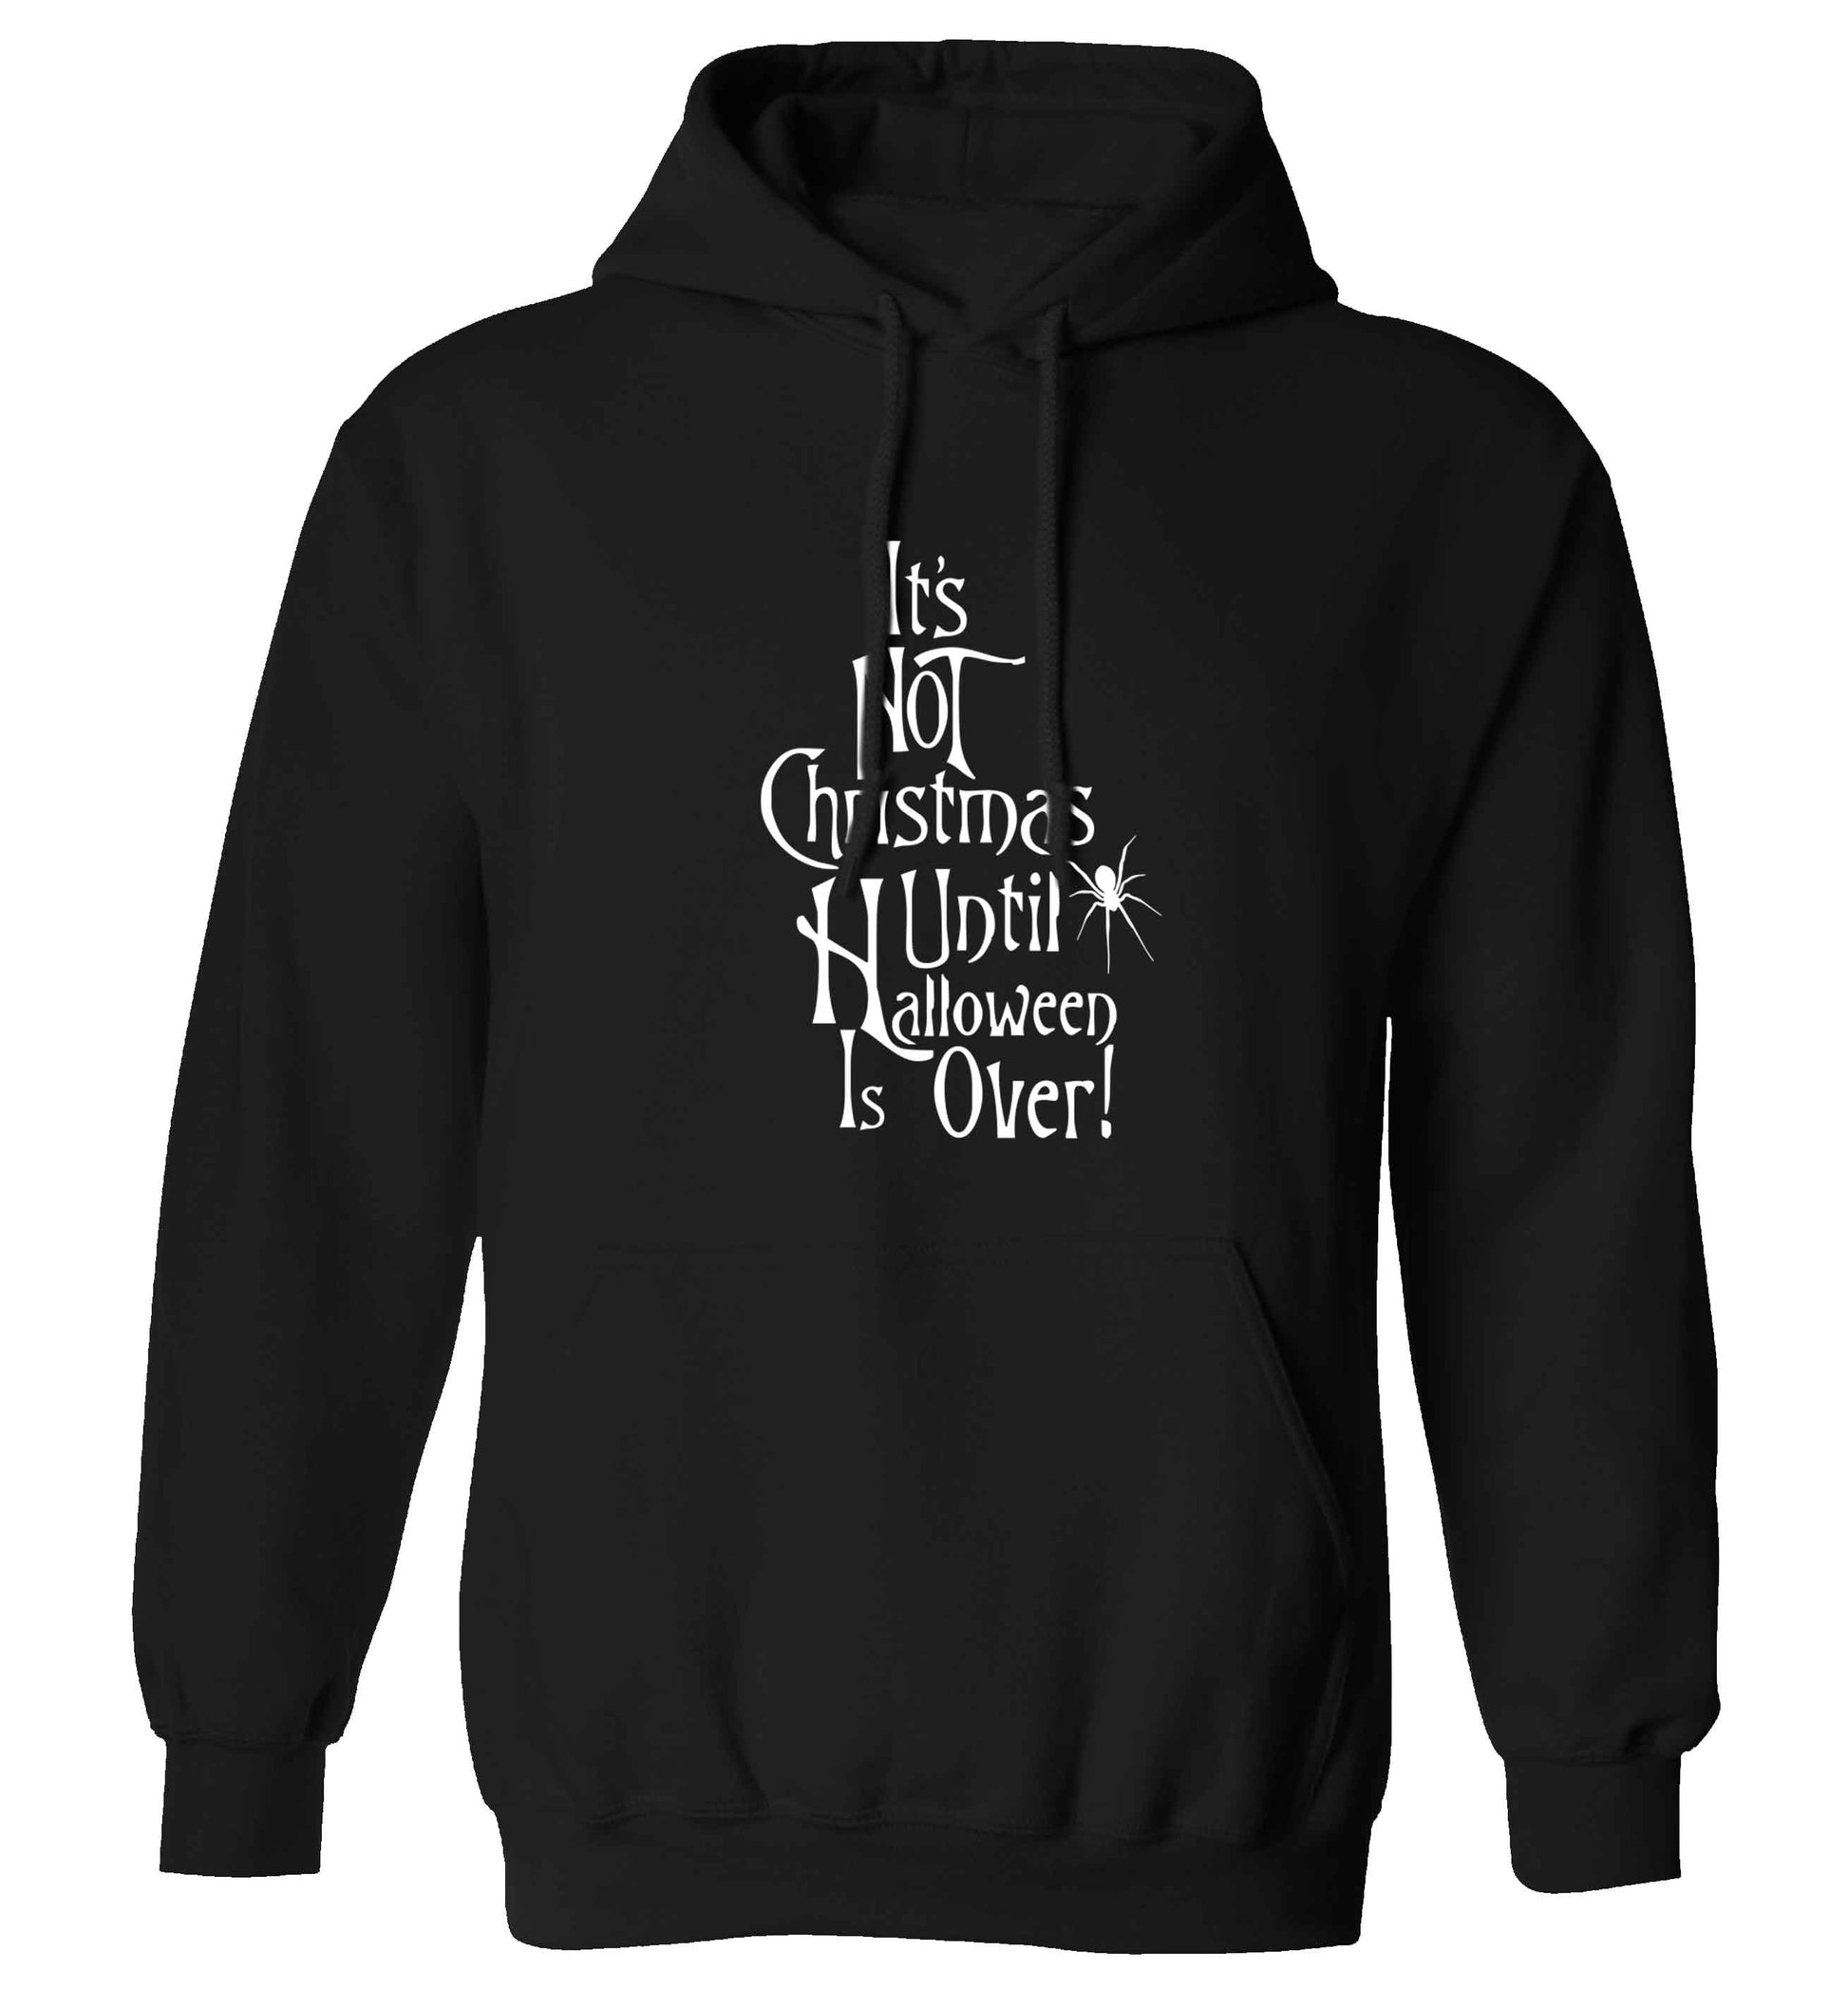 It's not Christmas until Halloween is over adults unisex black hoodie 2XL